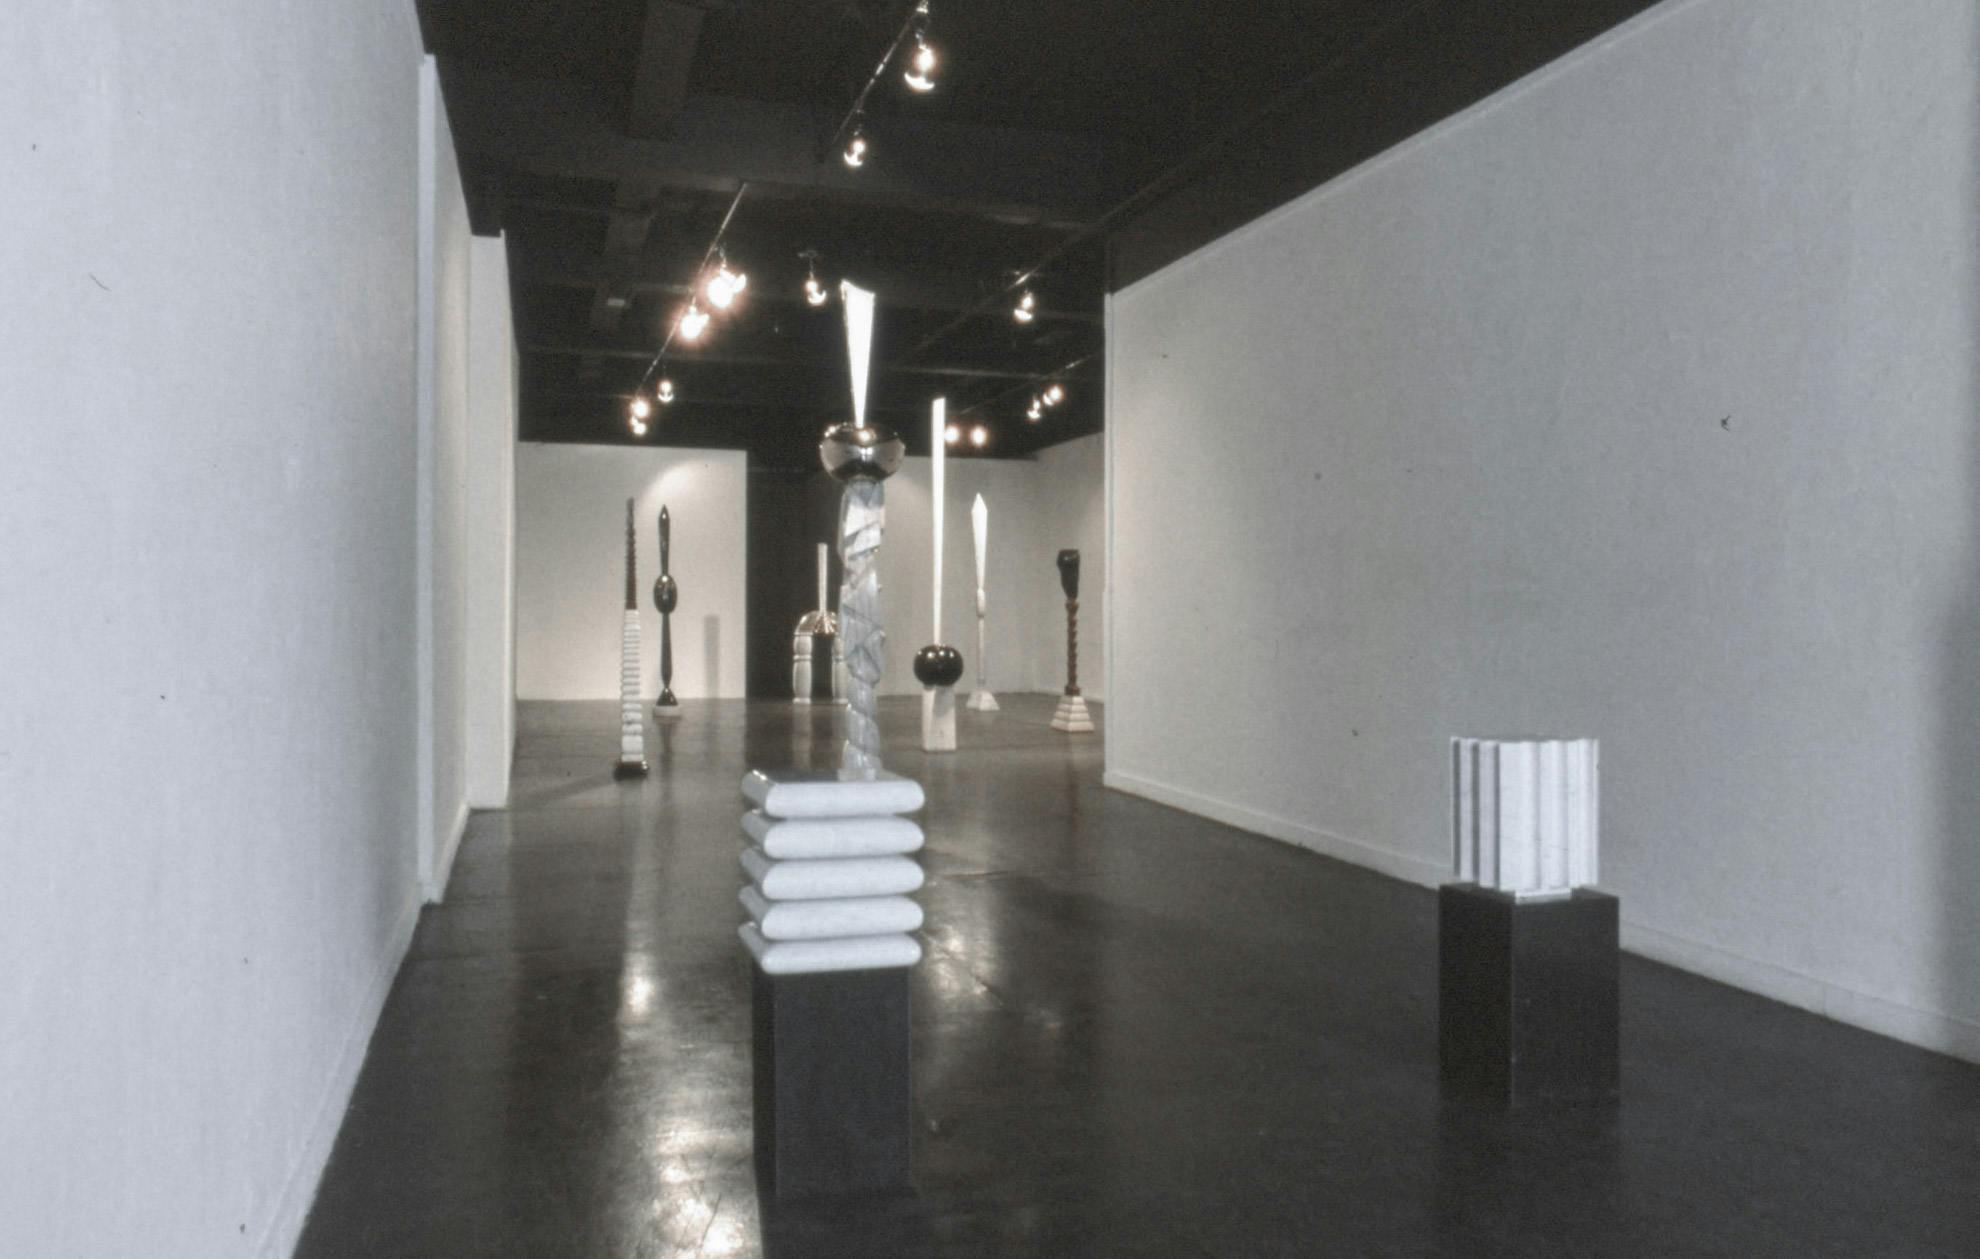 Several sculptures in a gallery. In the foreground, two small white curved forms sit atop black rectangular shapes. In the background the forms are tall and thin, with both bulbous and narrow parts.